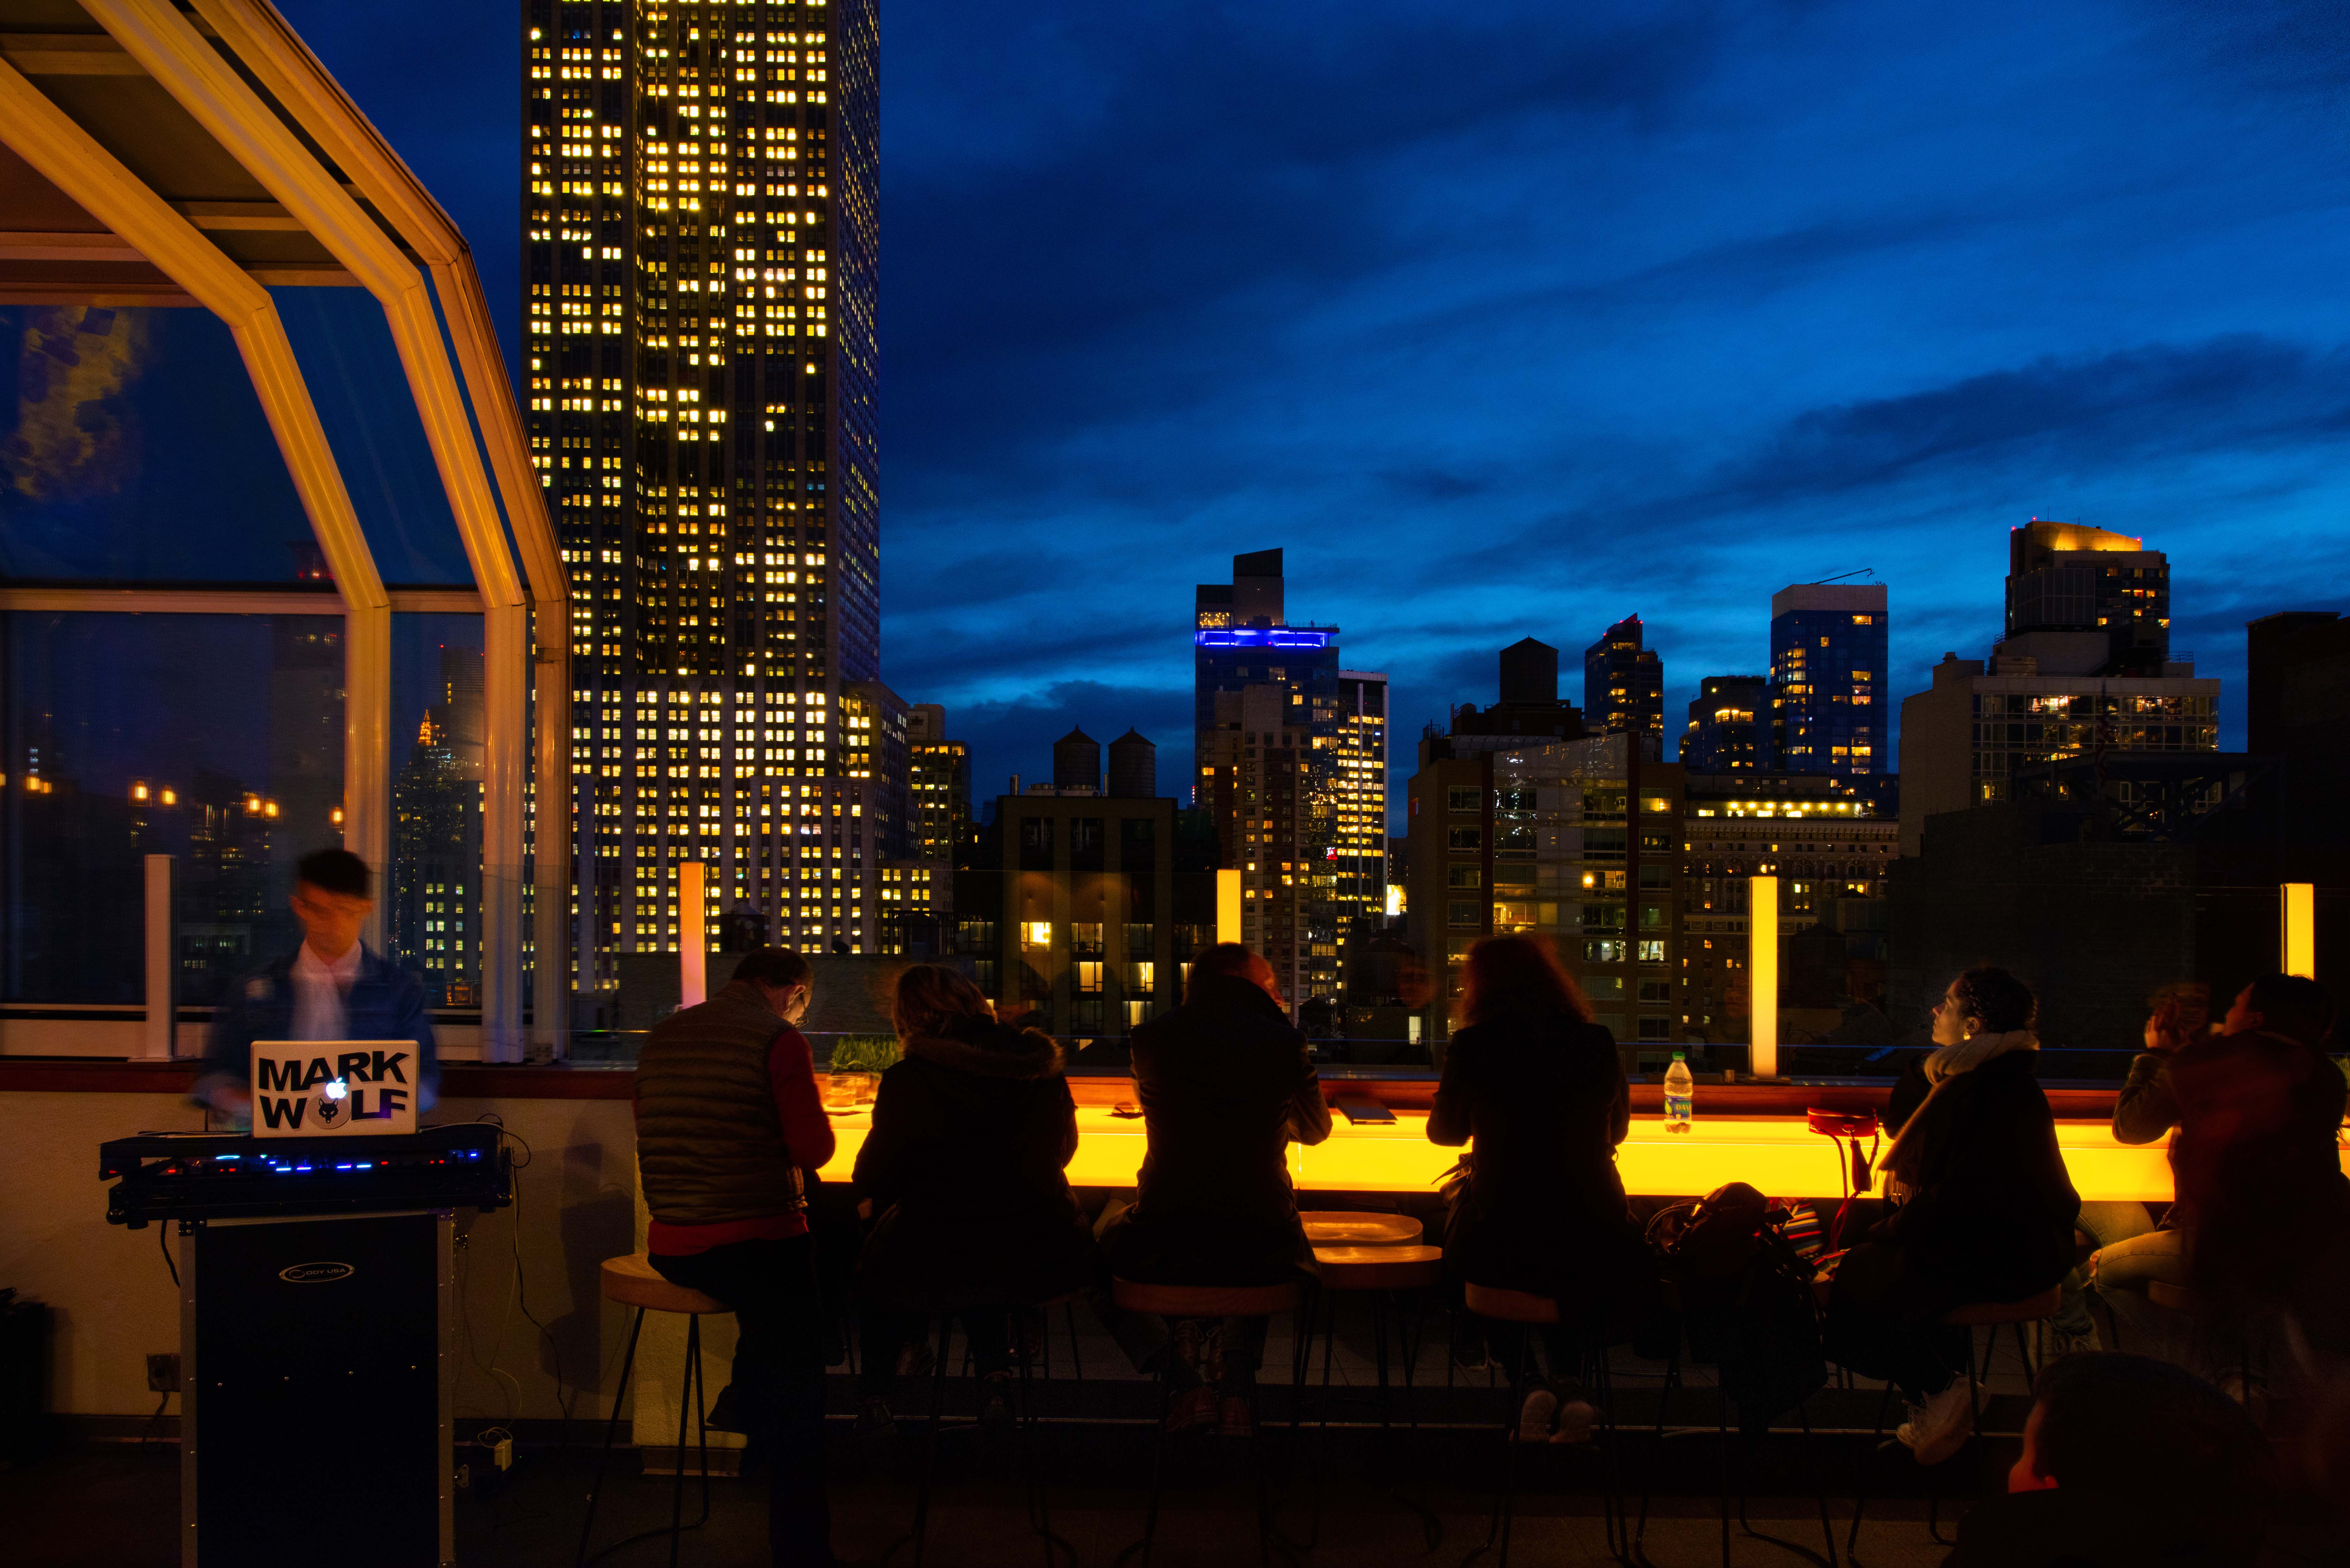 People enjoying rooftop bar with view of Manhattan at night as DJ plays music